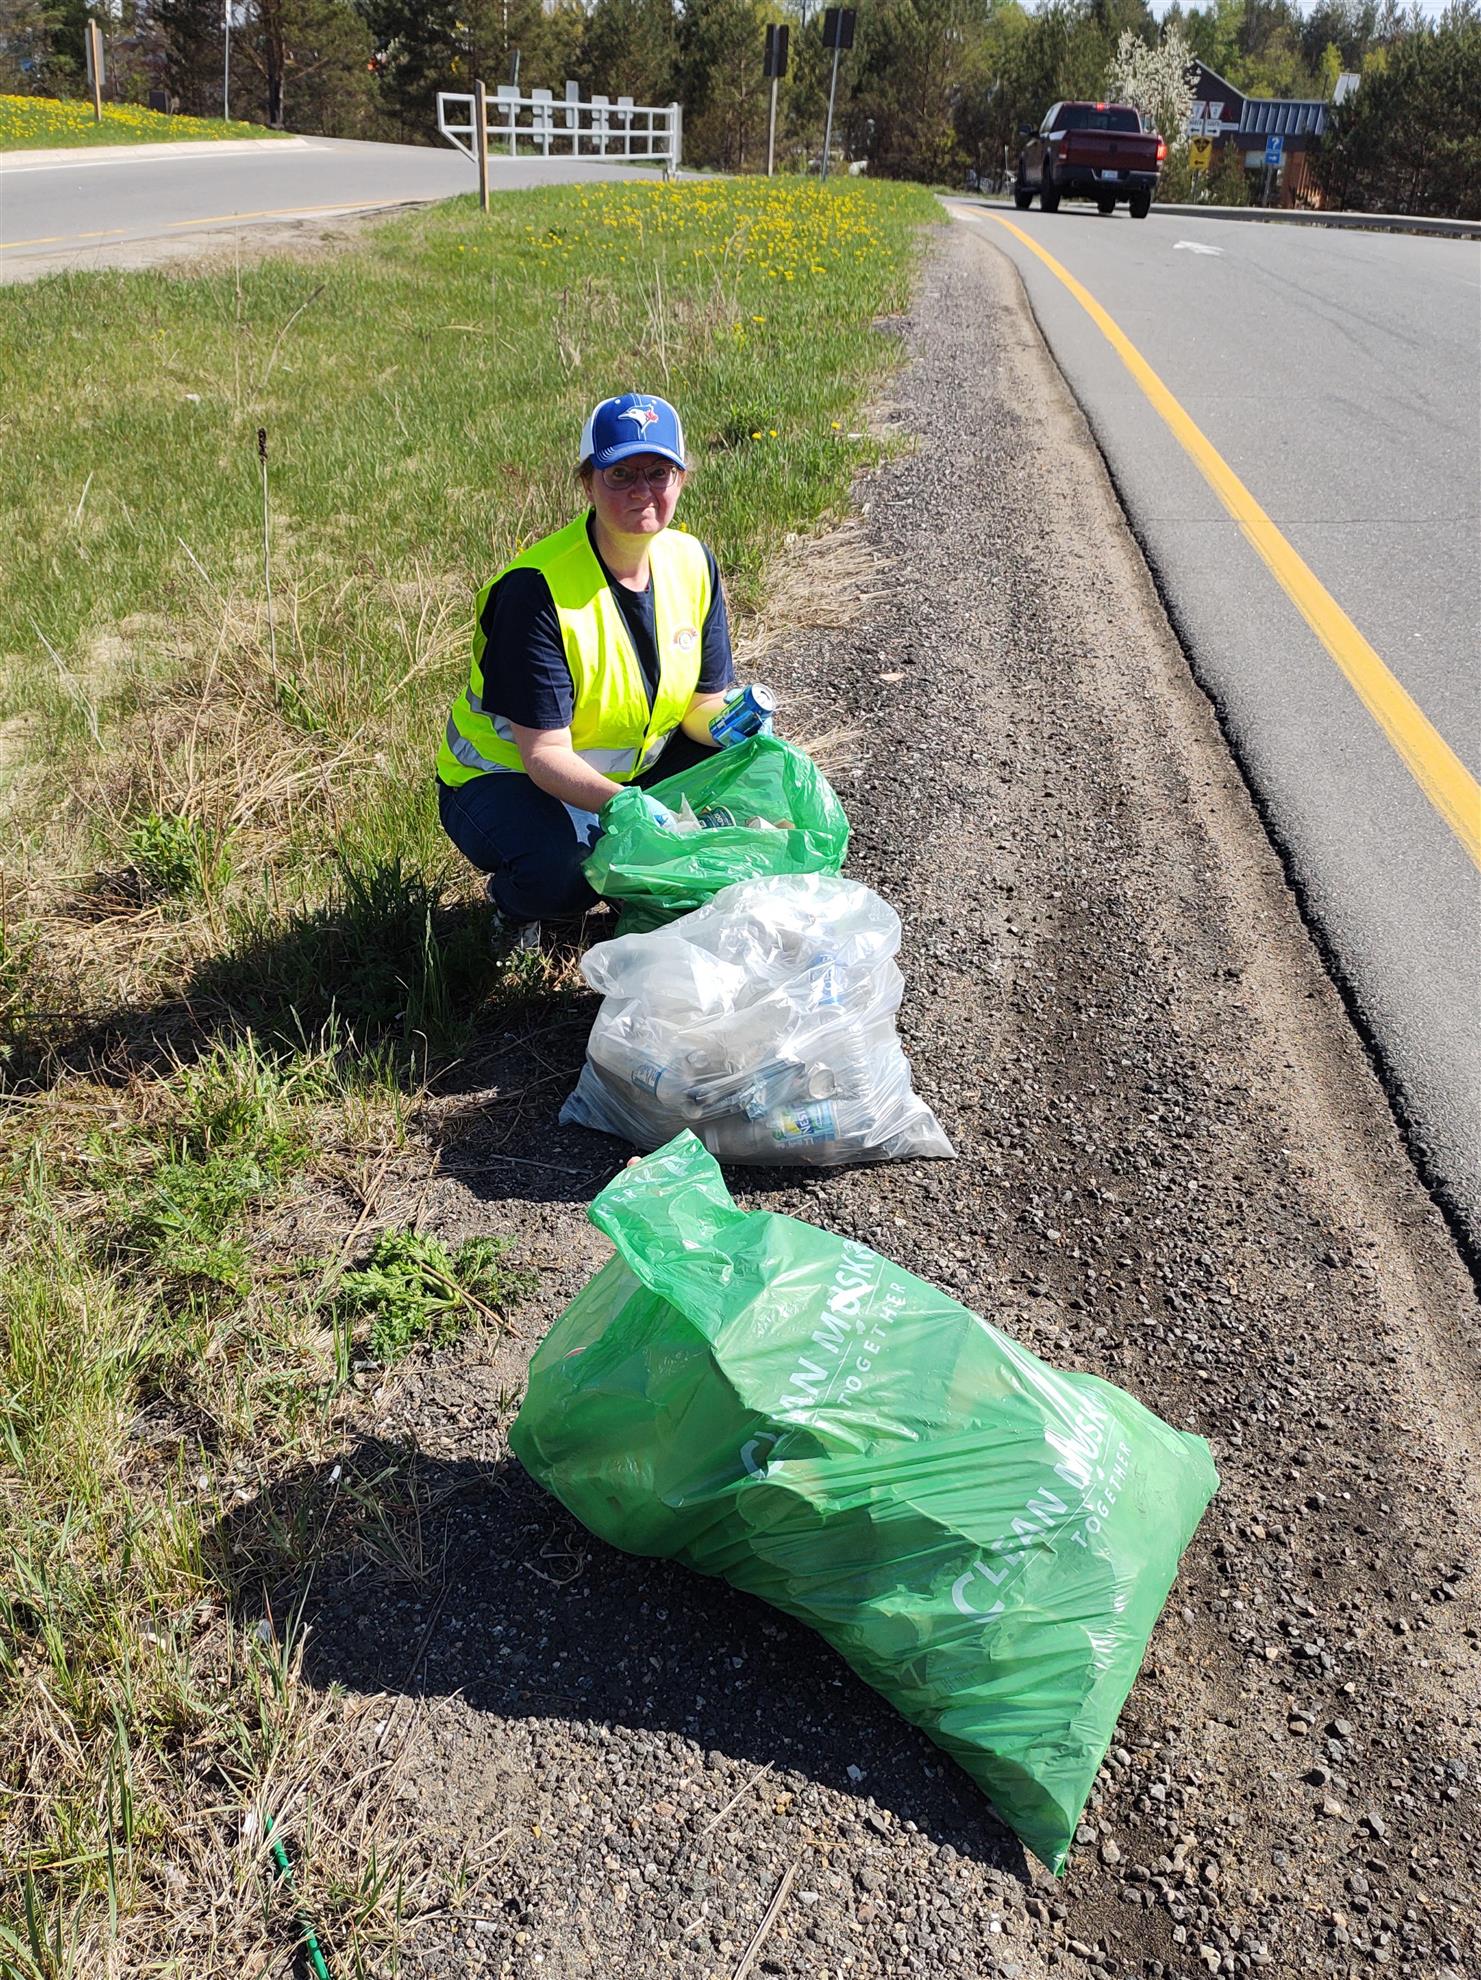 A woman frowns while crouching beside 3 bags of litter at a roadside.